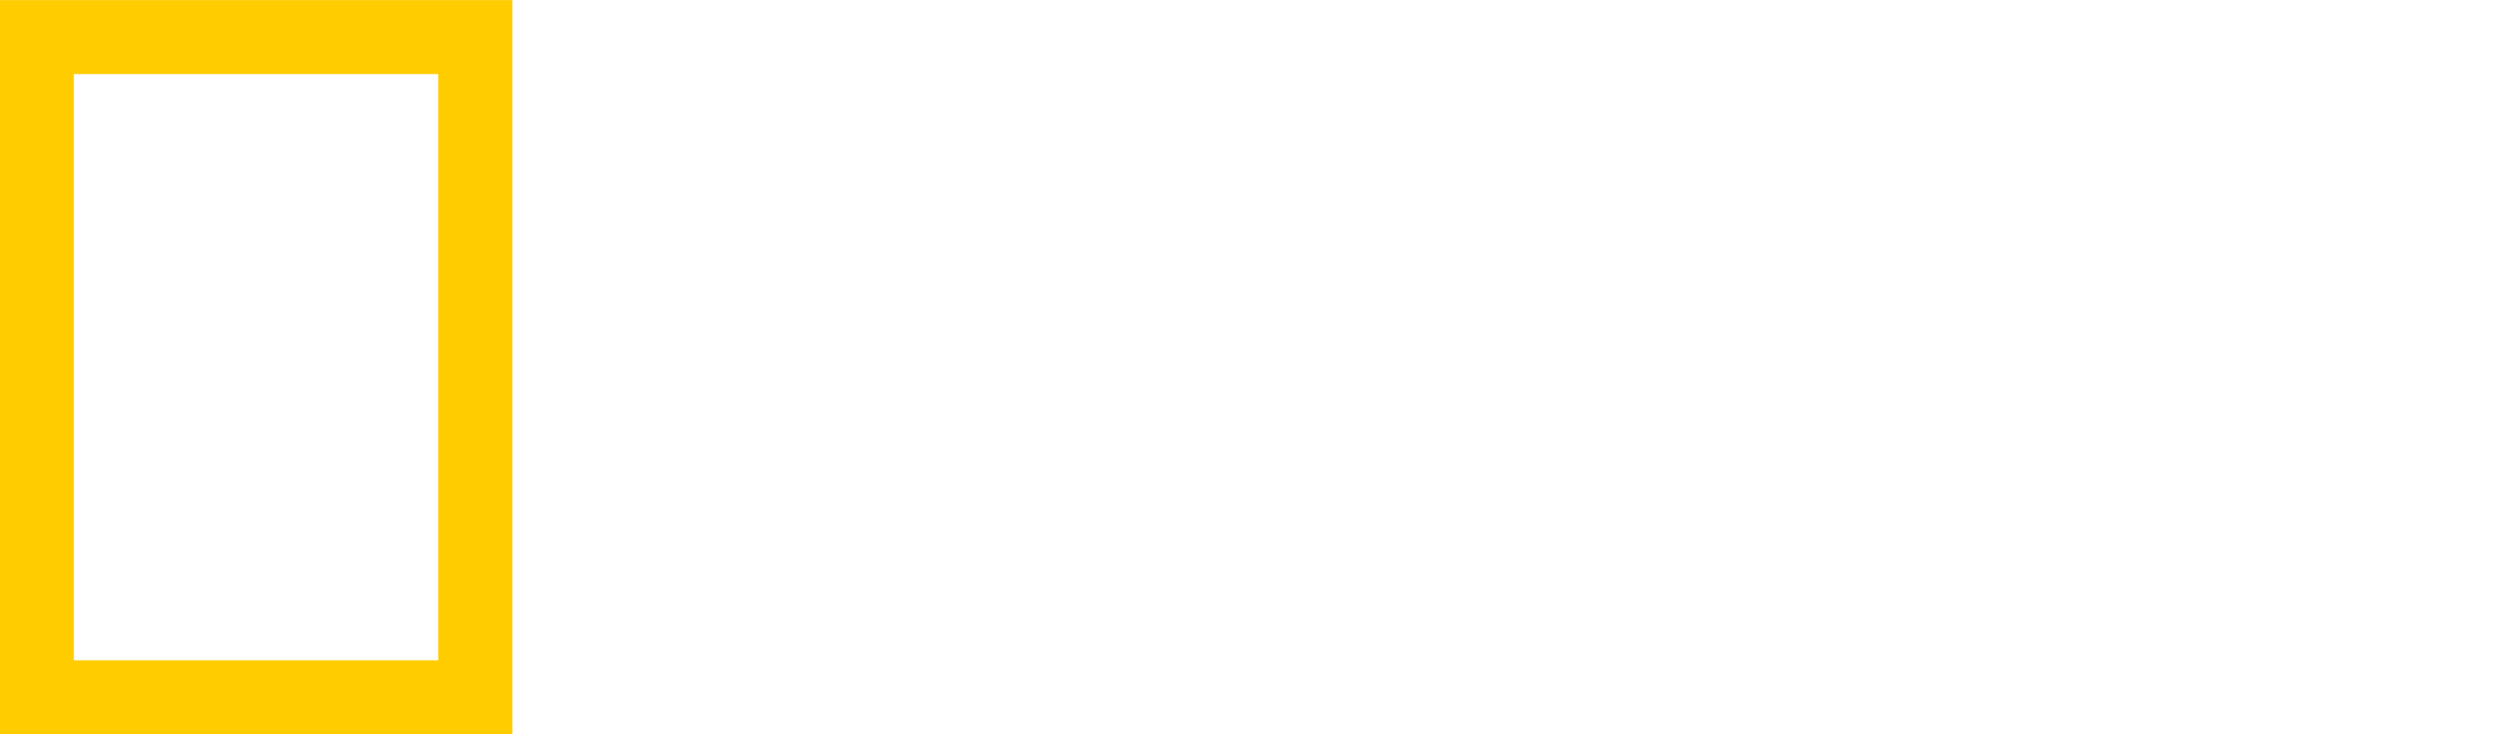 National_Geographic_logo_invert.png